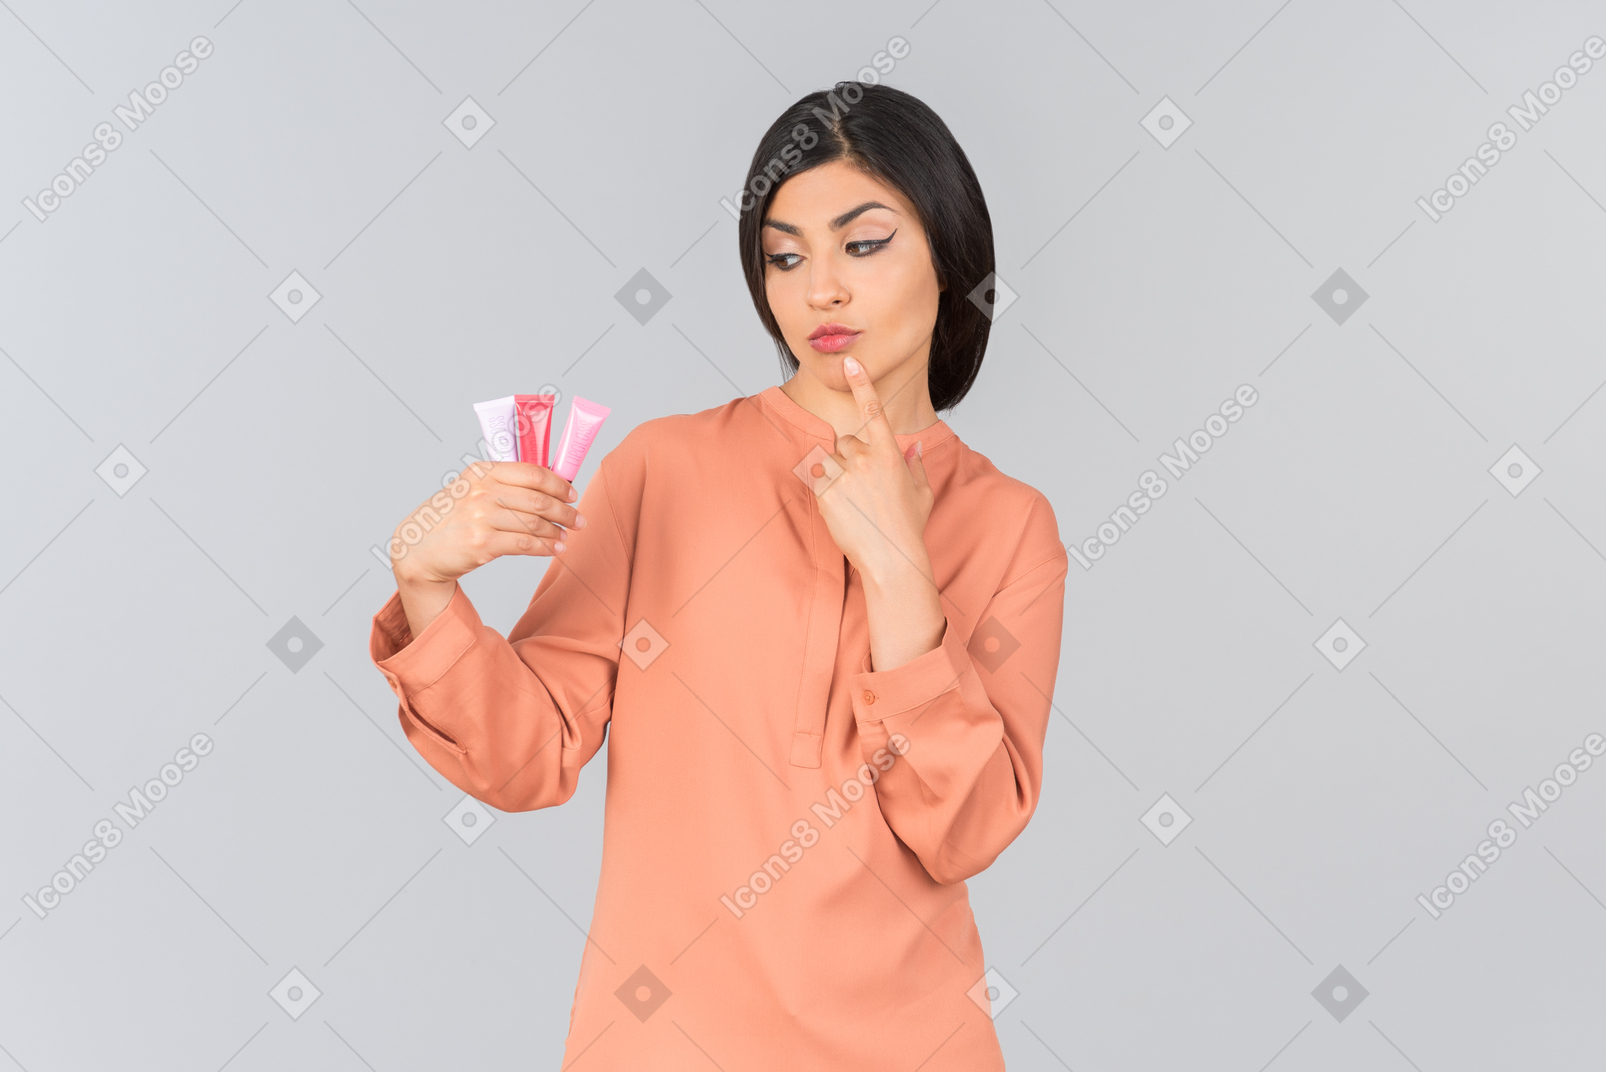 Pensive indian woman choosing from lip balms she's holding